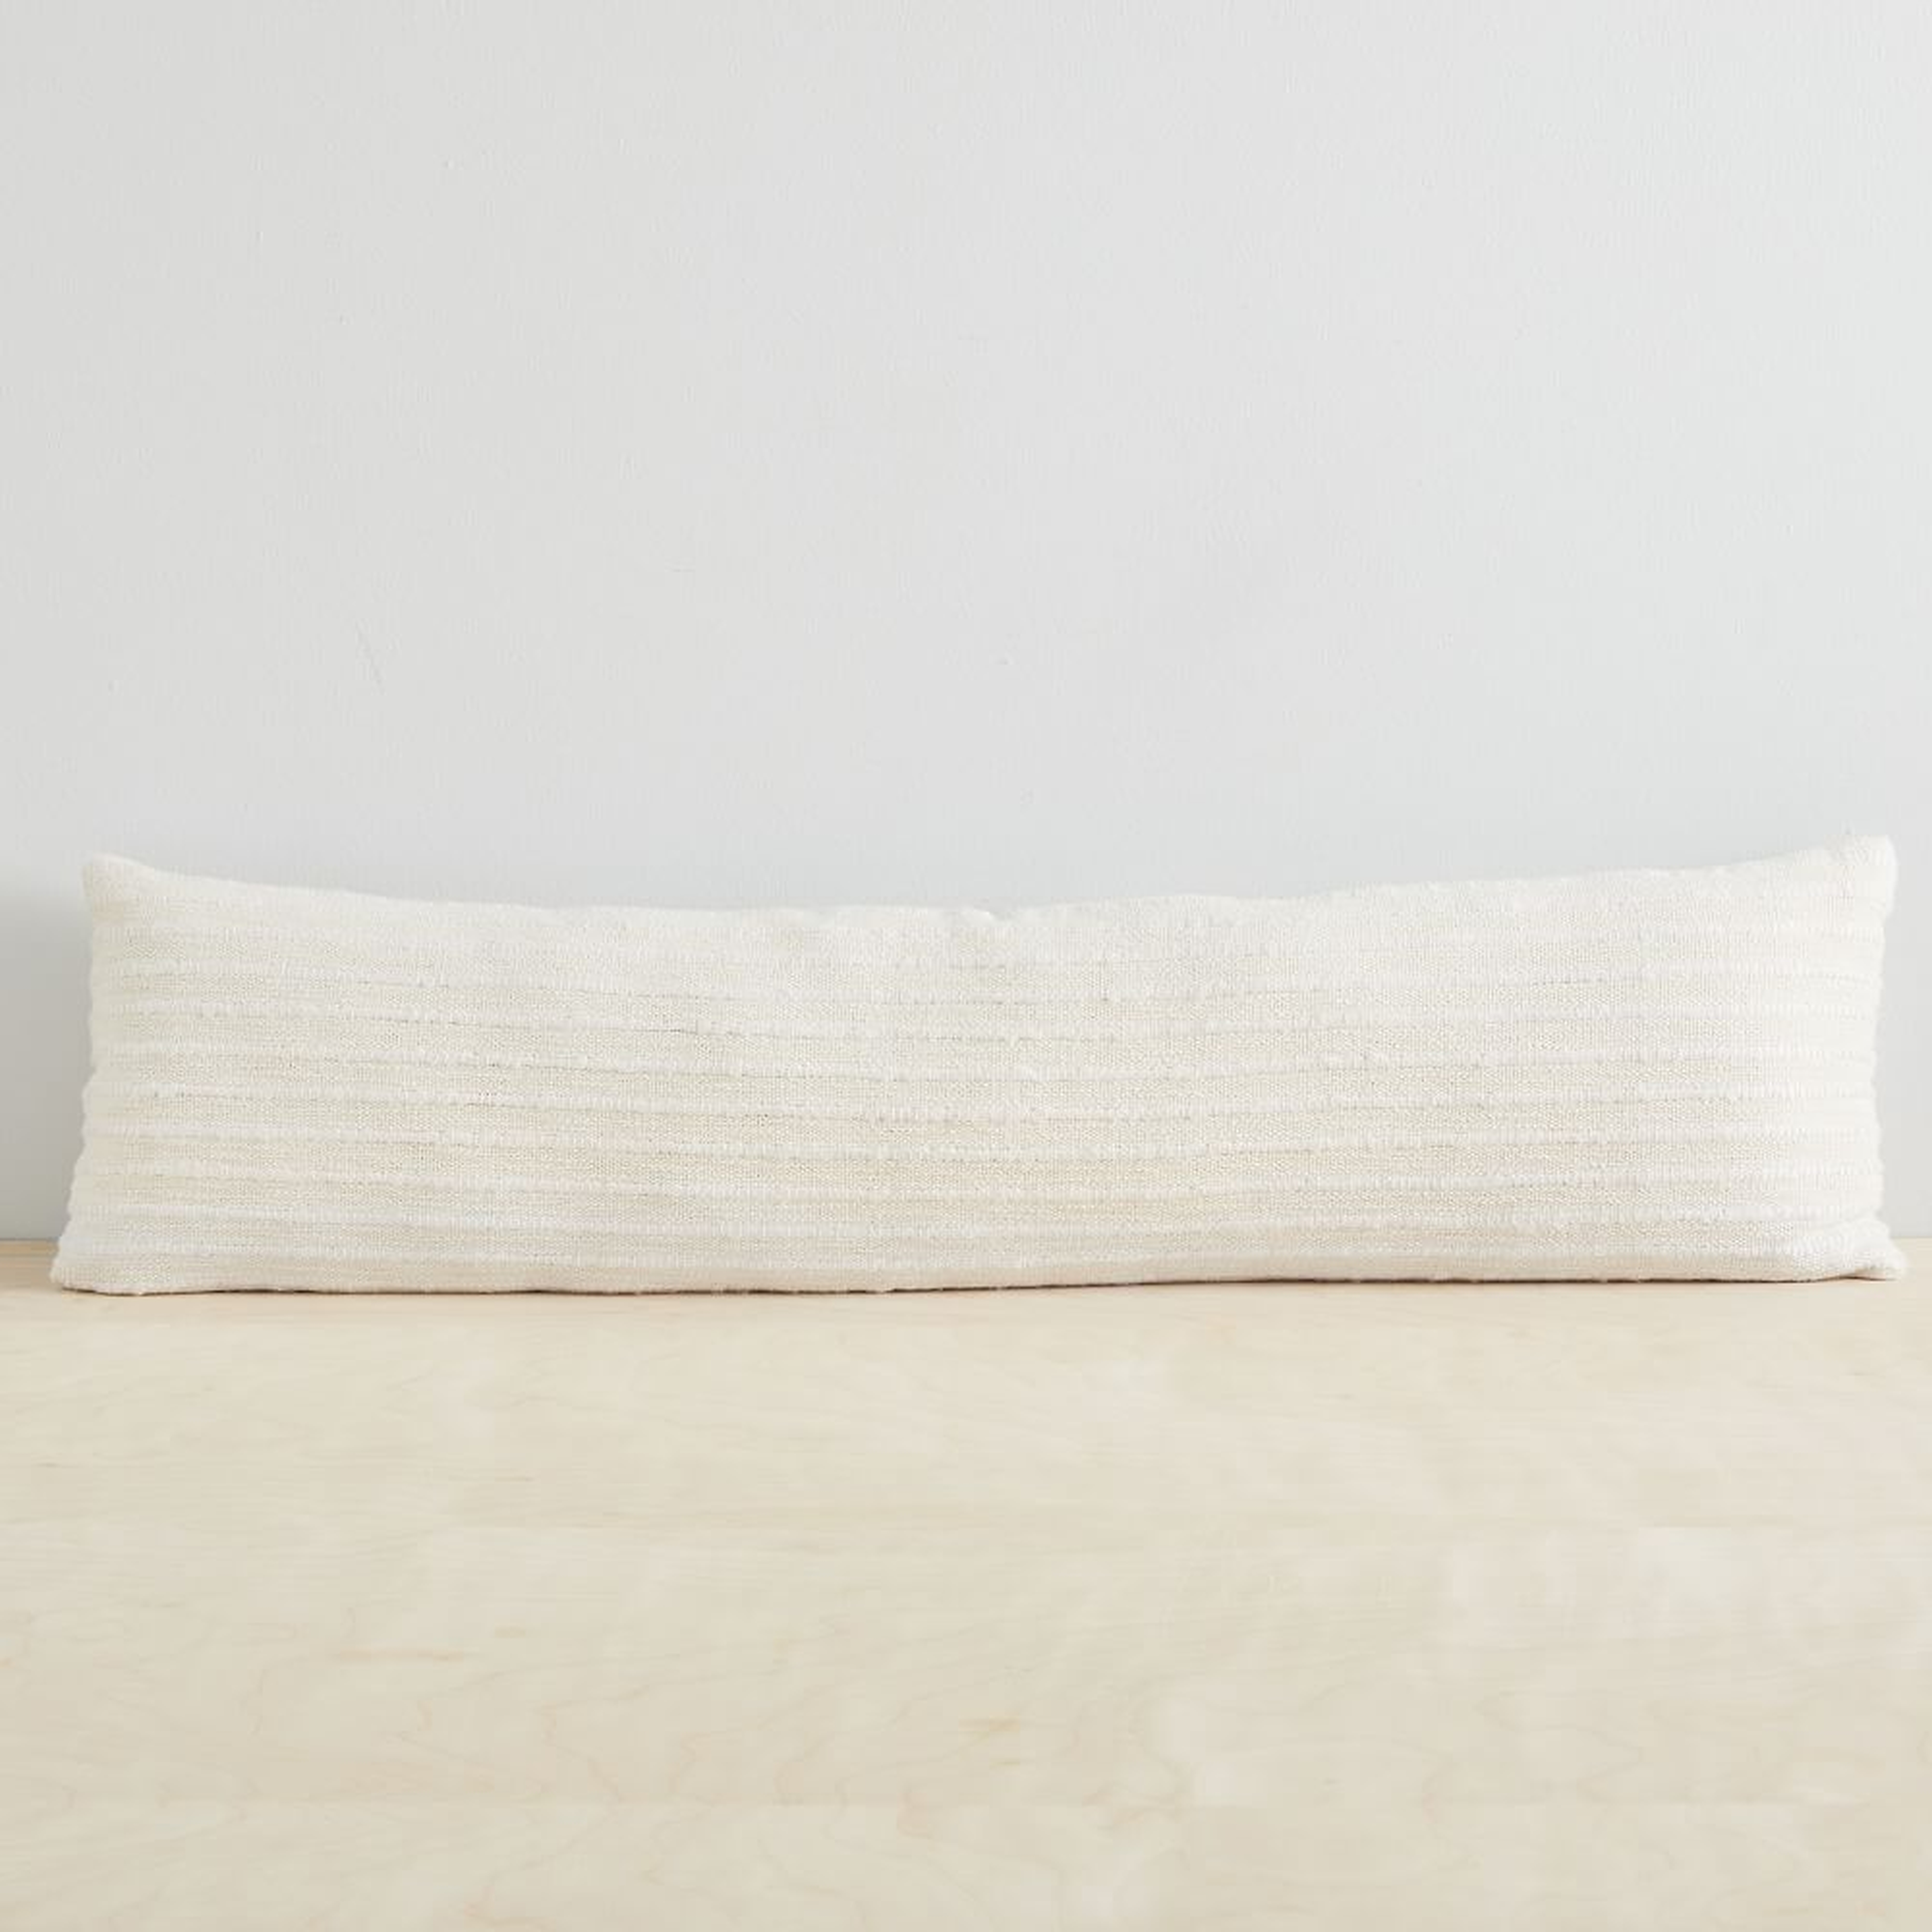 Soft Corded Pillow Cover, 12"x46", Natural Canvas - West Elm